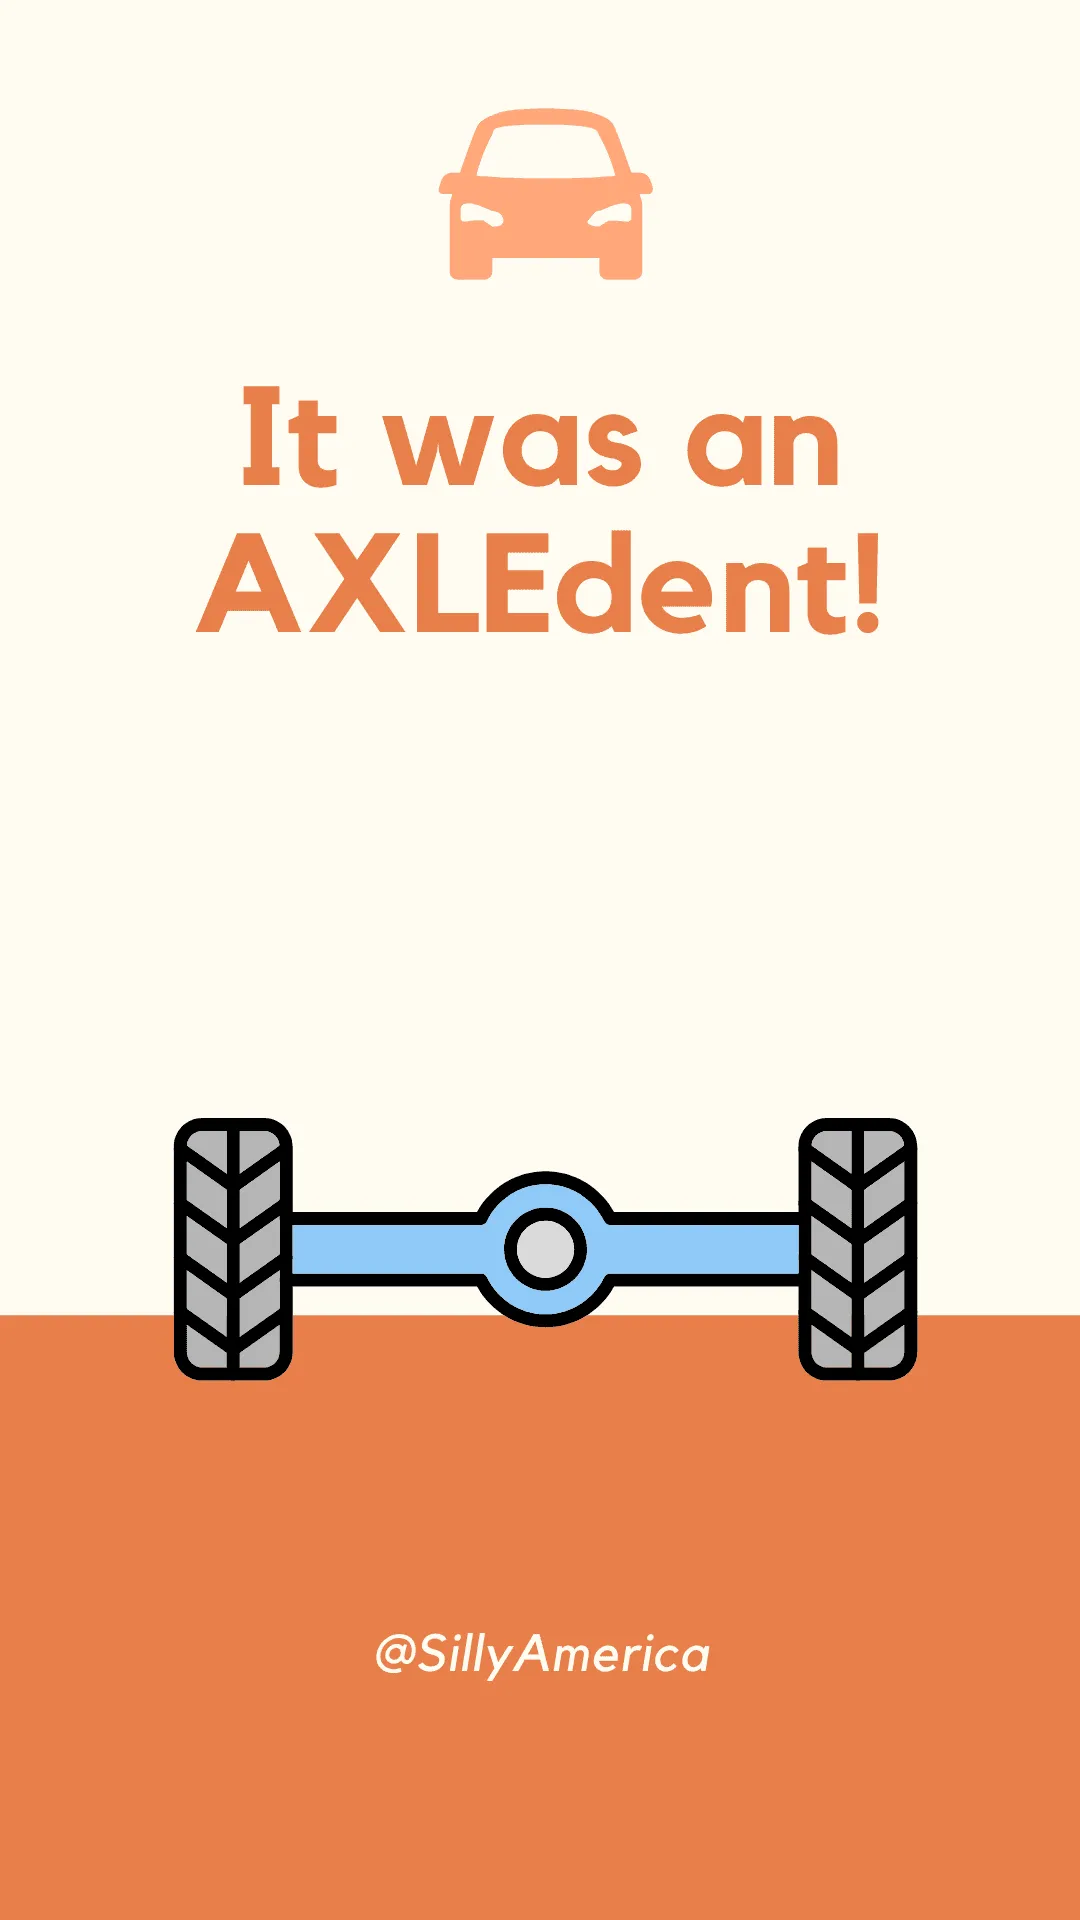 It was an AXLEdent! - Car Puns to fuel your road trip content!